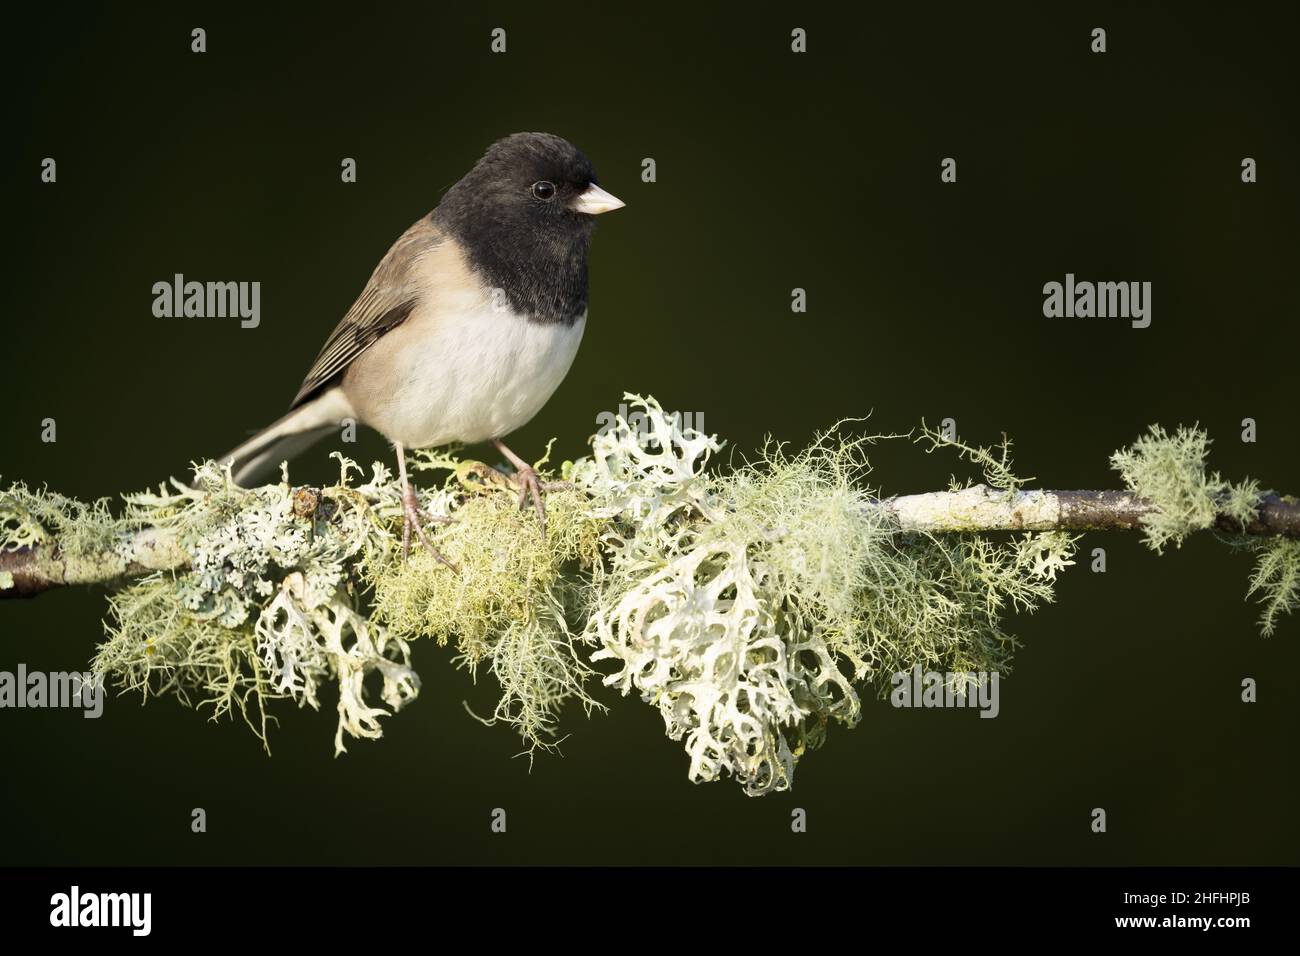 Male dark-eyed junco perched on lichen covered branch, Snohomish, Washington, USA Stock Photo